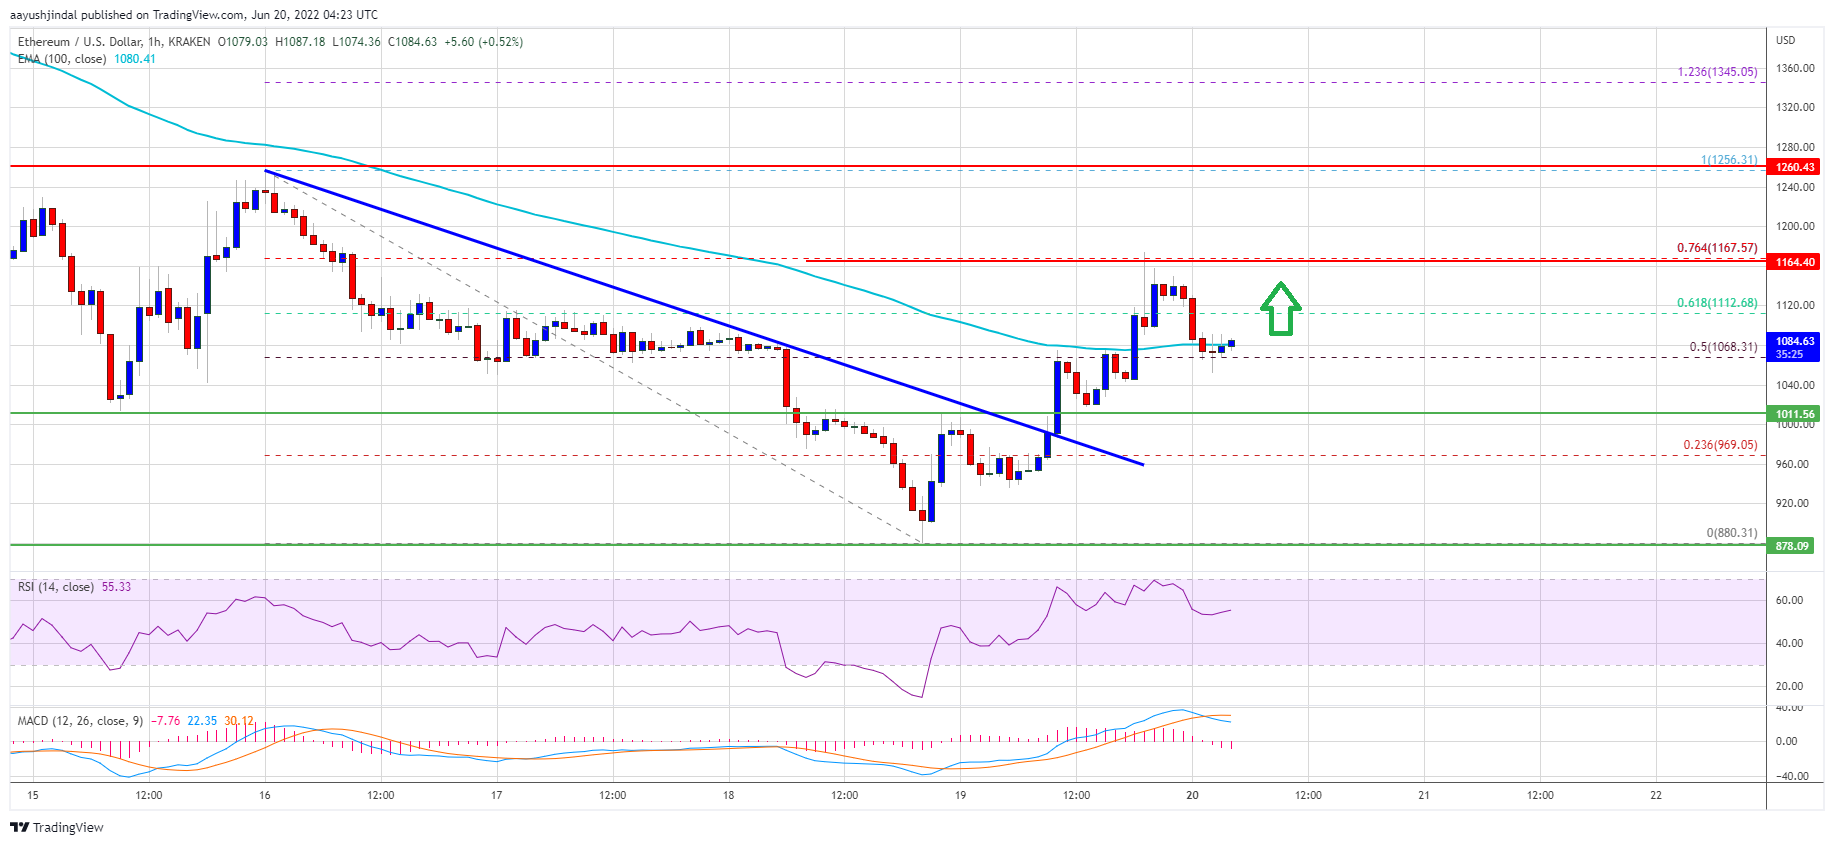 TA: Ethereum recovery could gain momentum if it clears this resistance